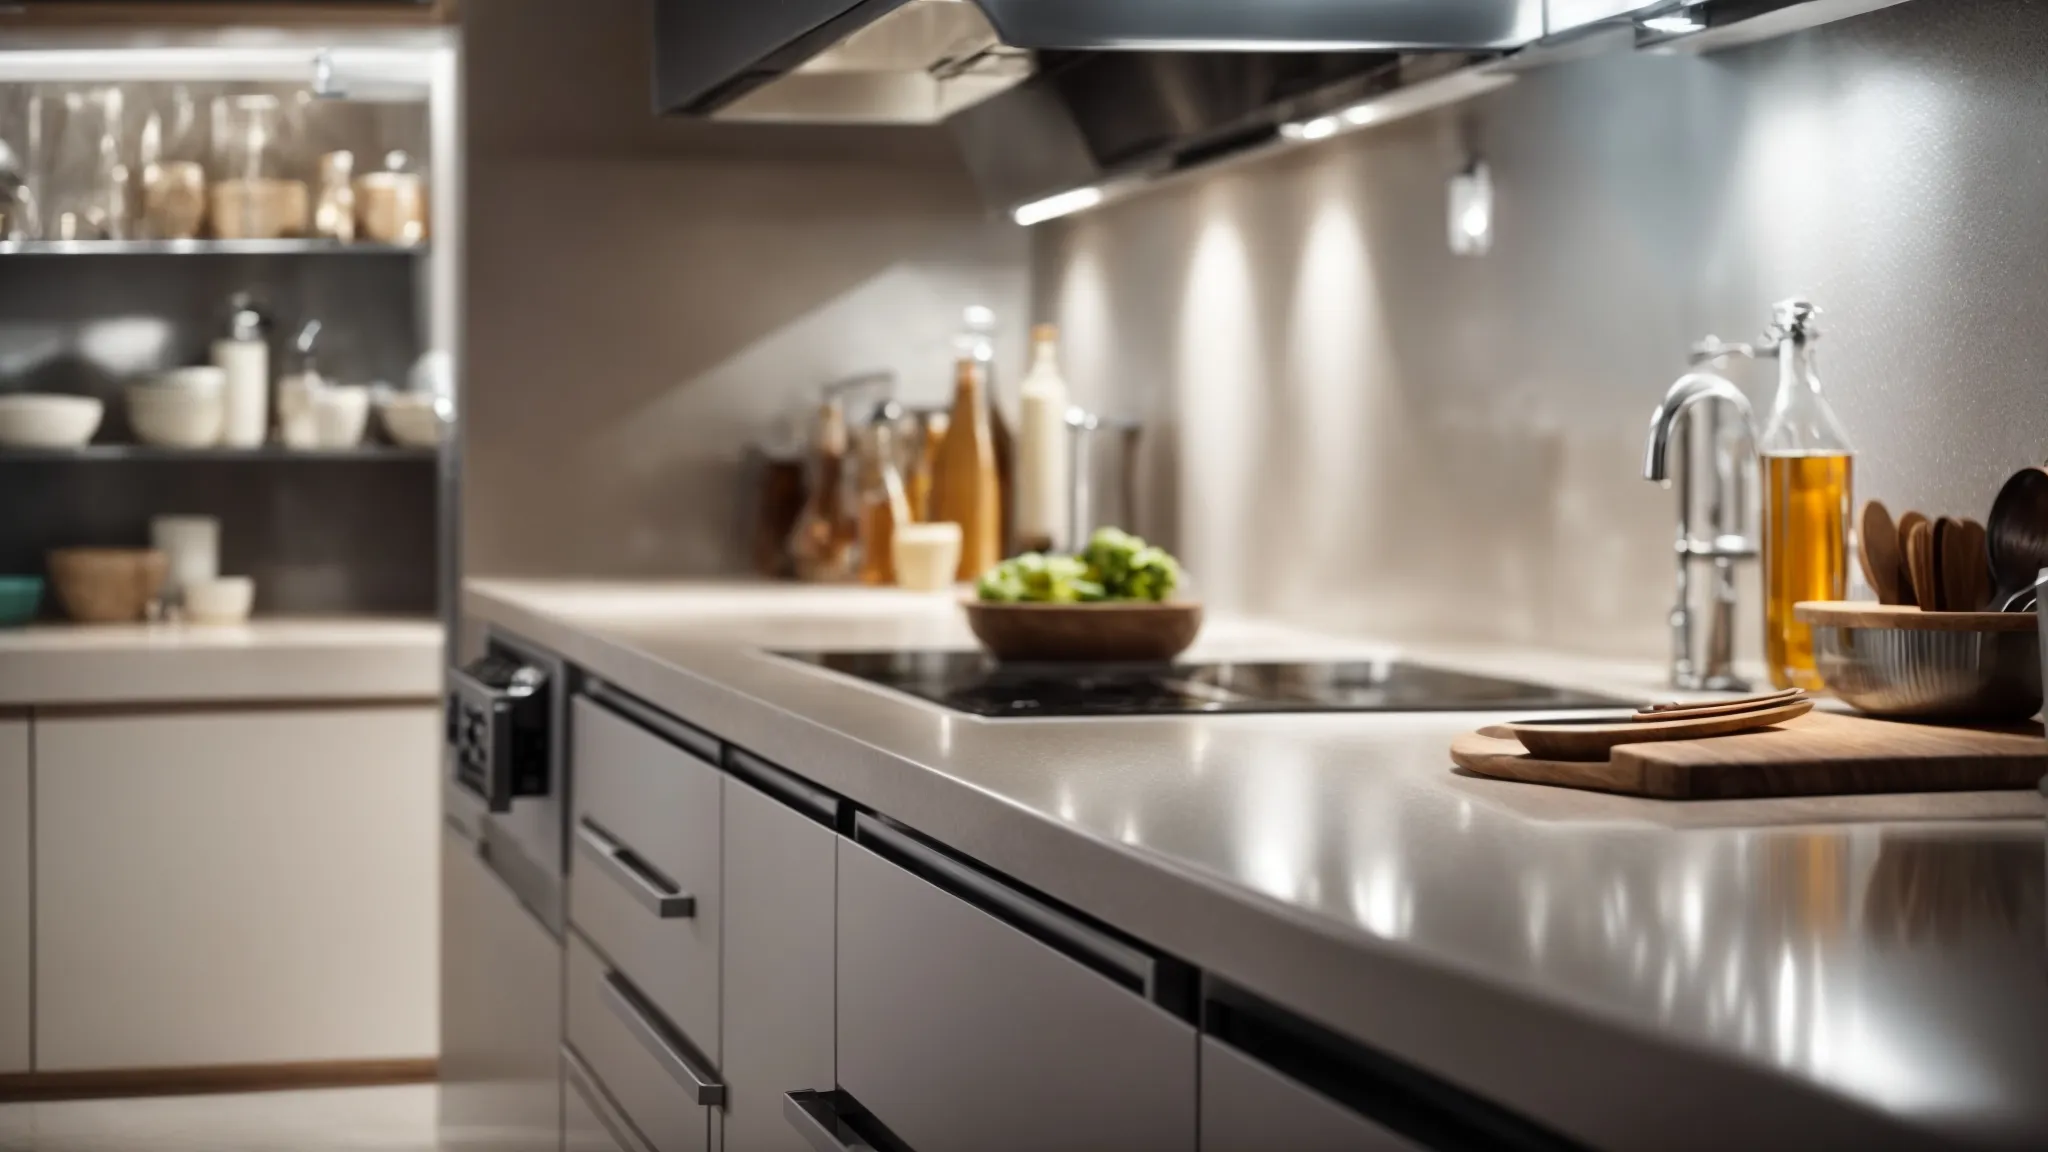 a sparkling clean kitchen illuminated under bright lights, with clear countertops and gleaming surfaces, ready for its next culinary task.